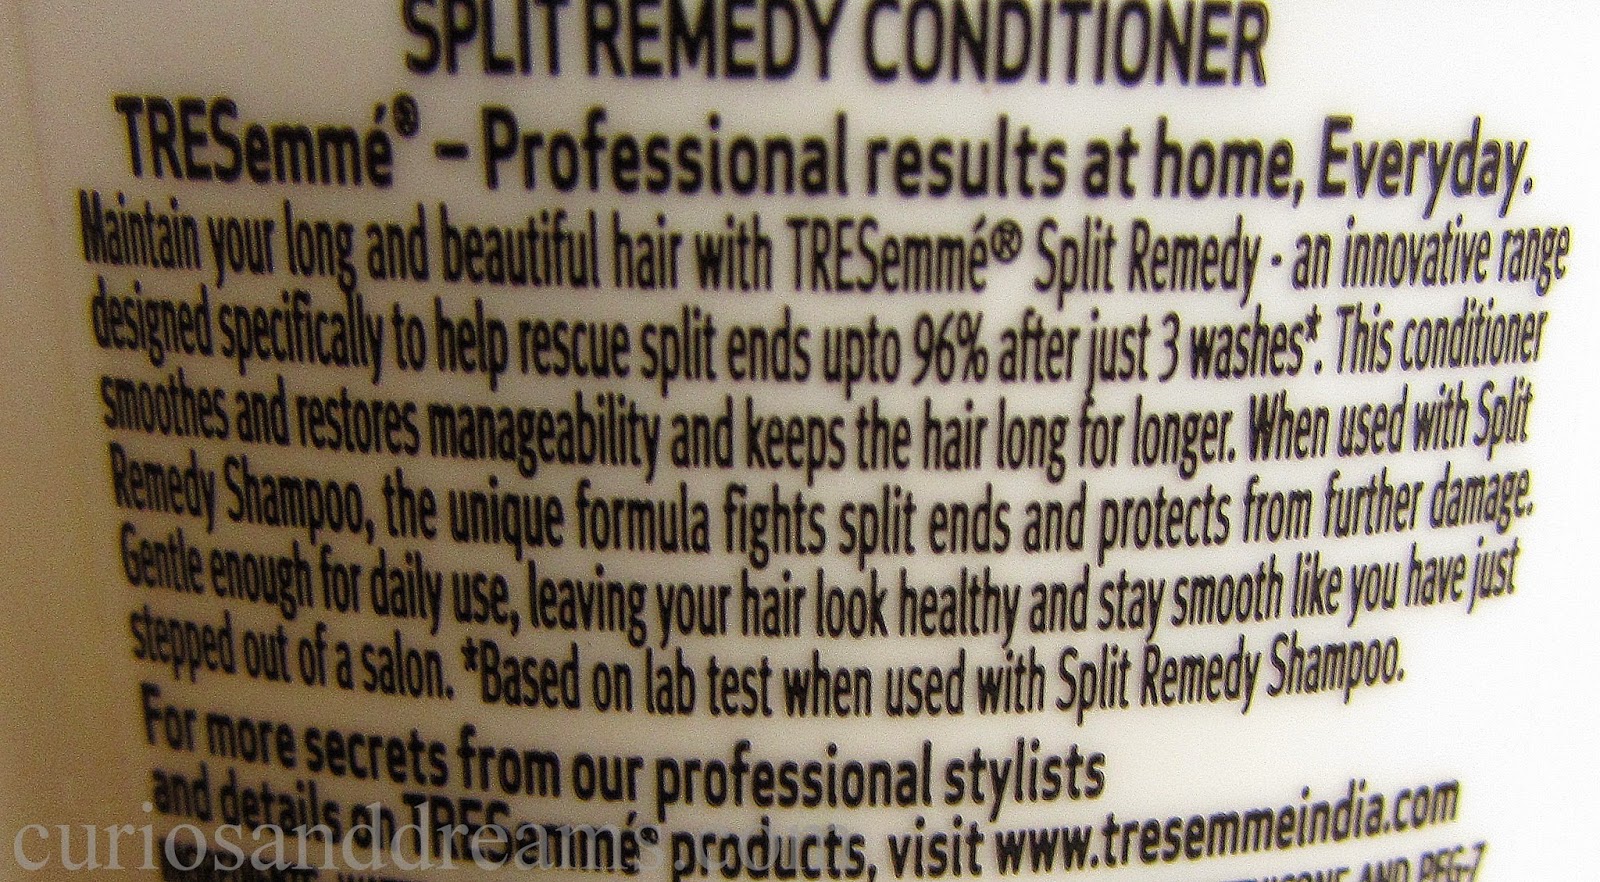 Tresemme Split Remedy Shampoo and Conditioner Review, Tresemme Split Remedy Shampoo review, Tresemme Split Remedy conditoner review